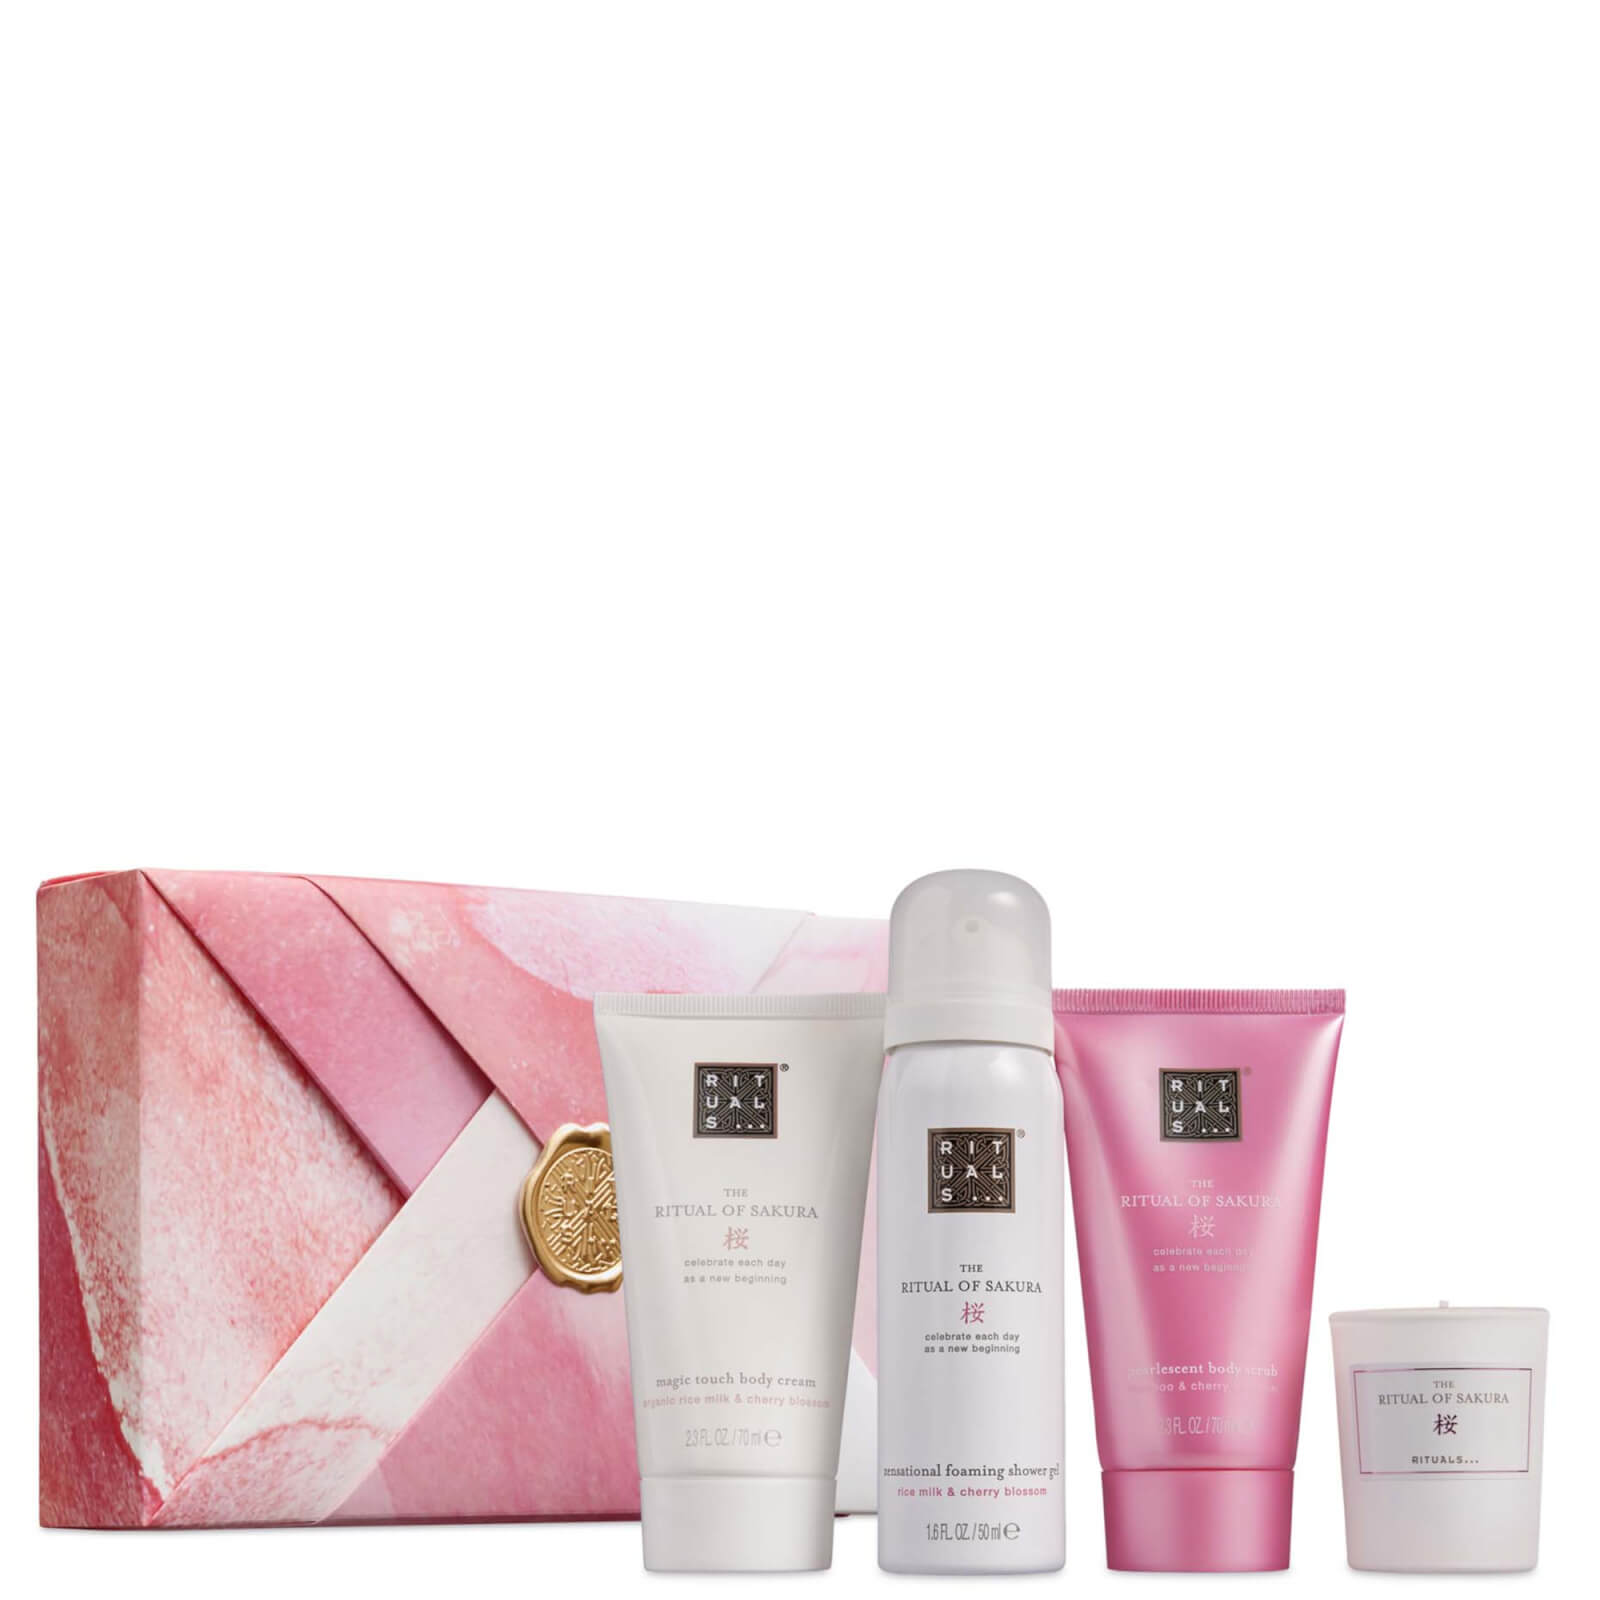 Image of Rituals The Ritual of Sakura Floral Cherry Blossom & Rice Milk Bath and Body Small Gift Set